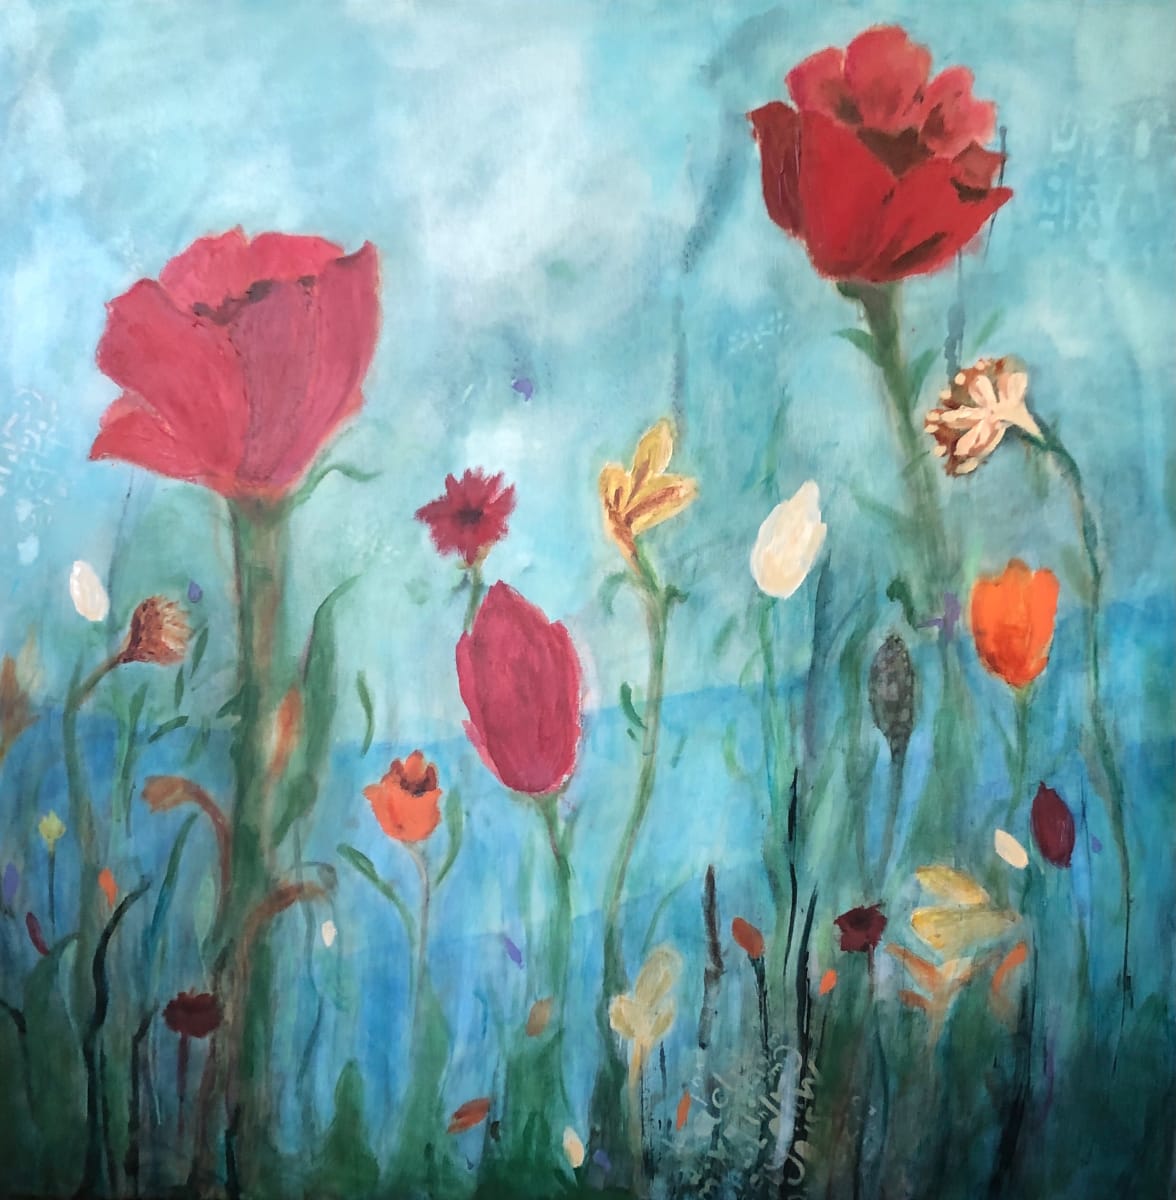 Floating Flowers by Darline Braz  Image: Abstracted flowers